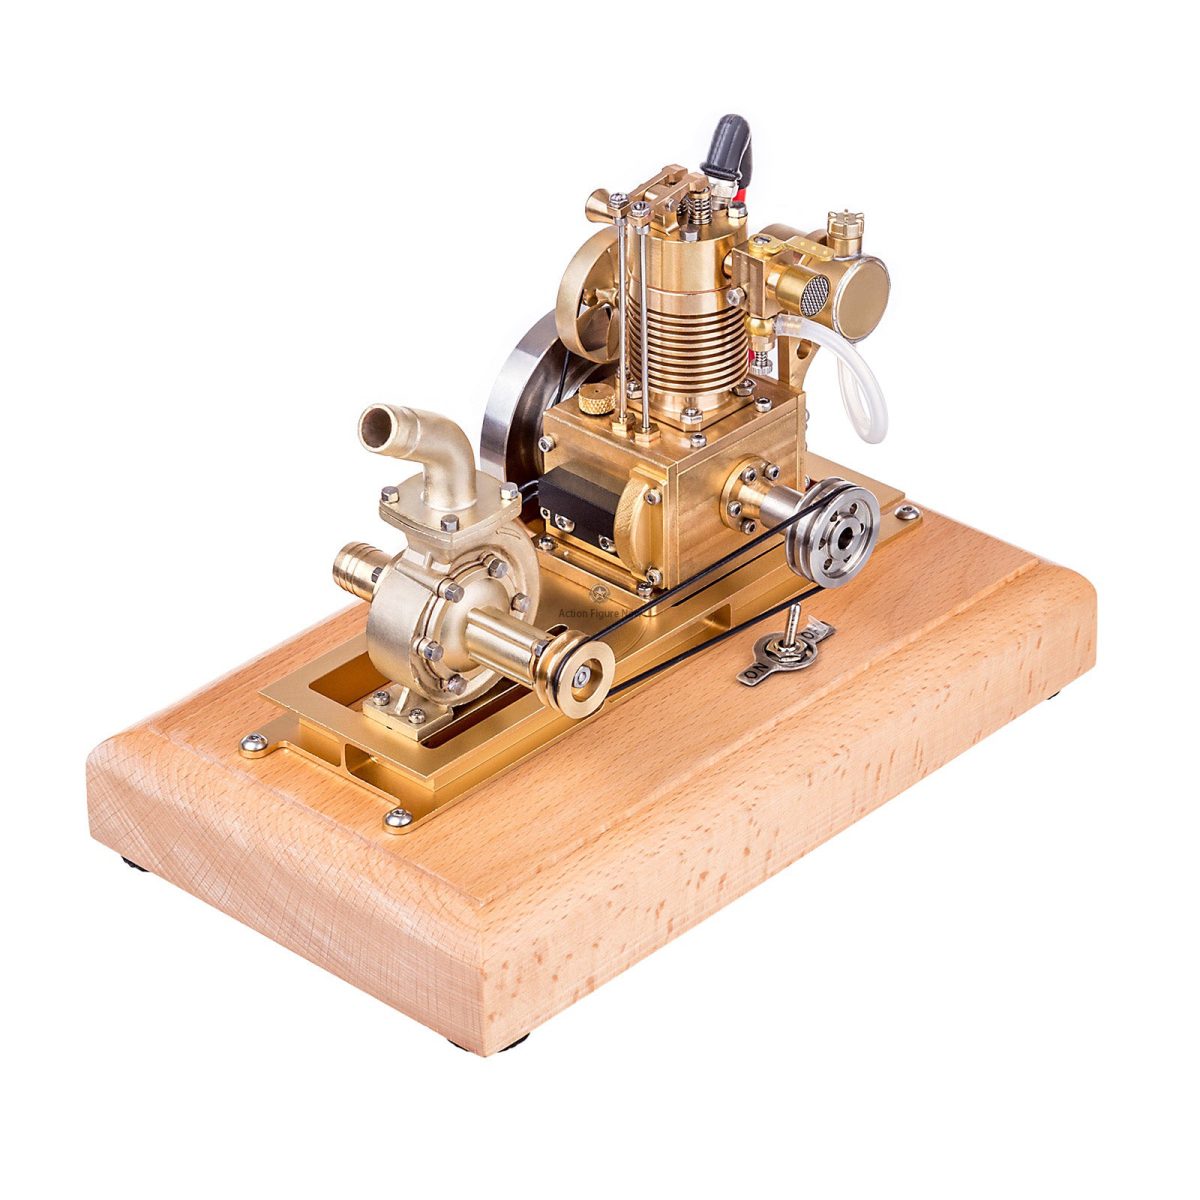 M16B 1.6cc Mini 4-Stroke Gas Engine Model, Horizontal Air-Cooled, Single Cylinder Internal Combustion Engine with Wooden Base